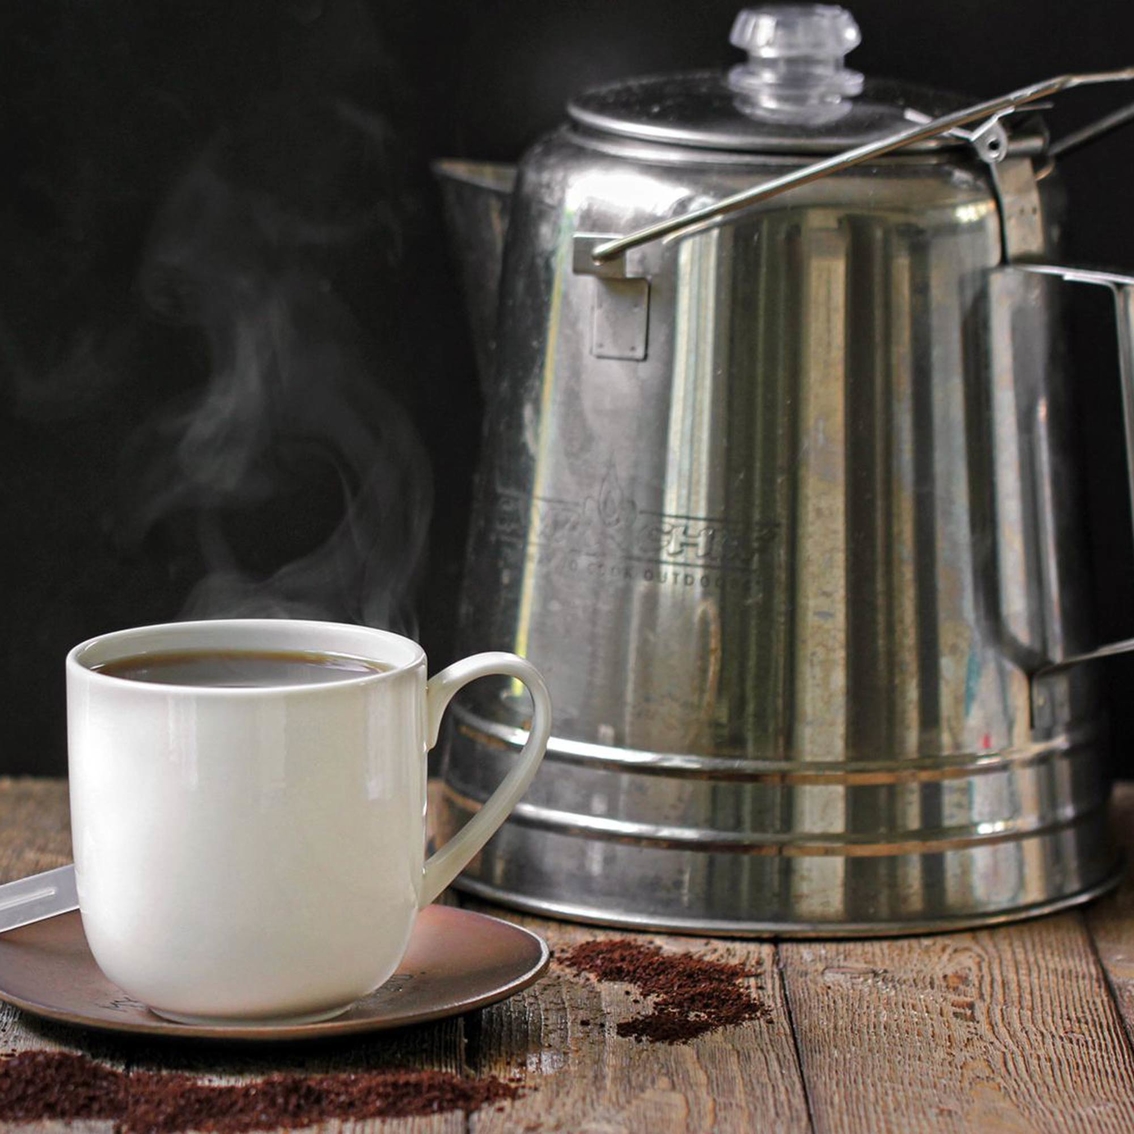 Camp Chef Stainless Steel Coffee Pot 28 Cup - Image 4 of 6